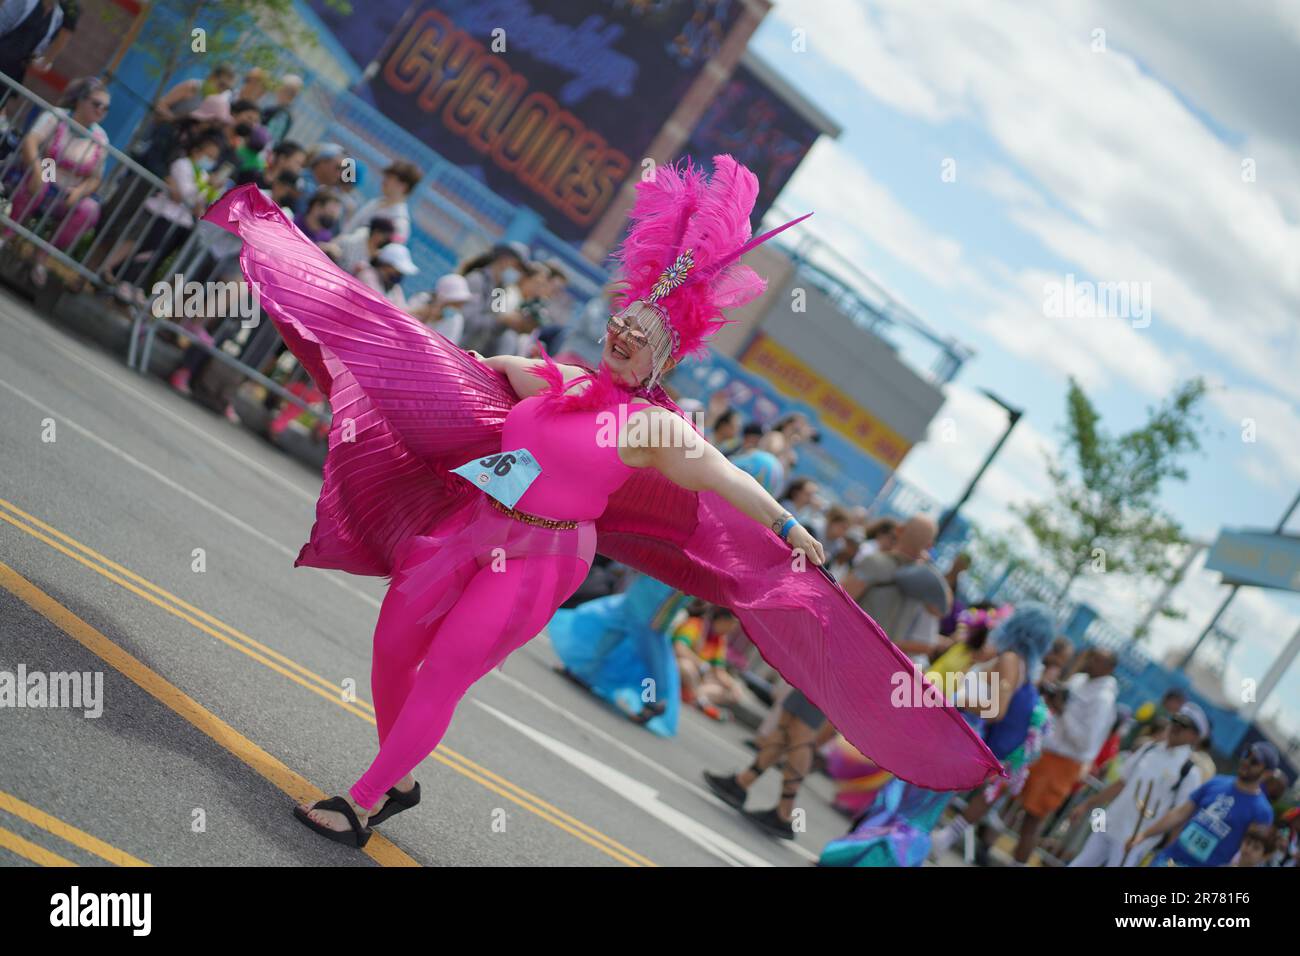 NEW YORK - JUNE 18, 2022: Participants marching during the 40th Annual Mermaid Parade at Coney Island, the largest parade in the nation and a celebrat Stock Photo